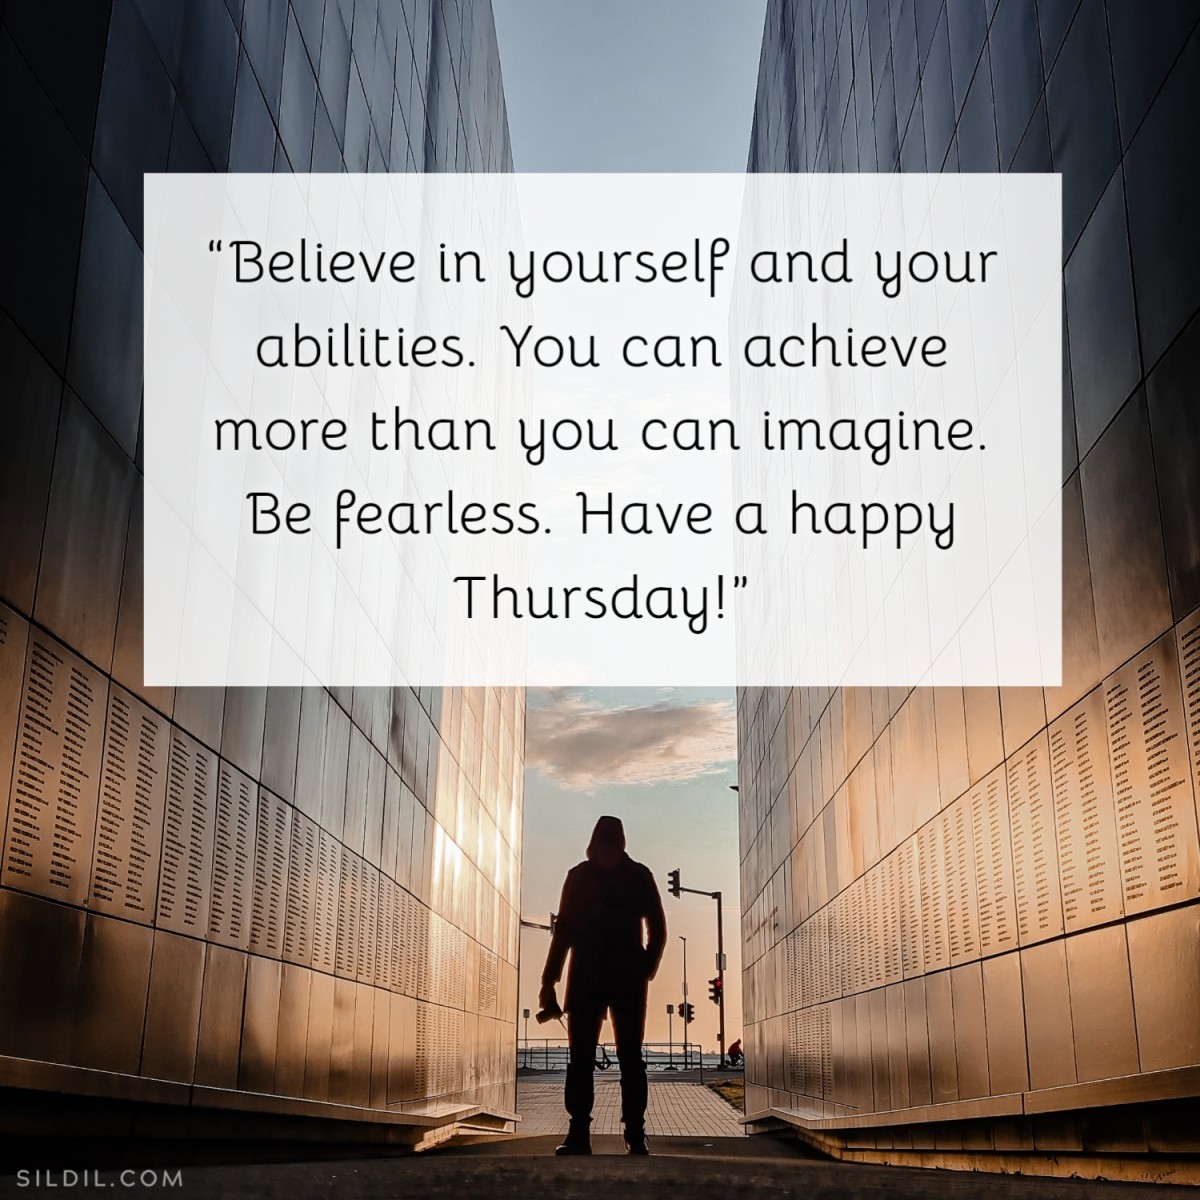 “Believe in yourself and your abilities. You can achieve more than you can imagine. Be fearless. Have a happy Thursday!”